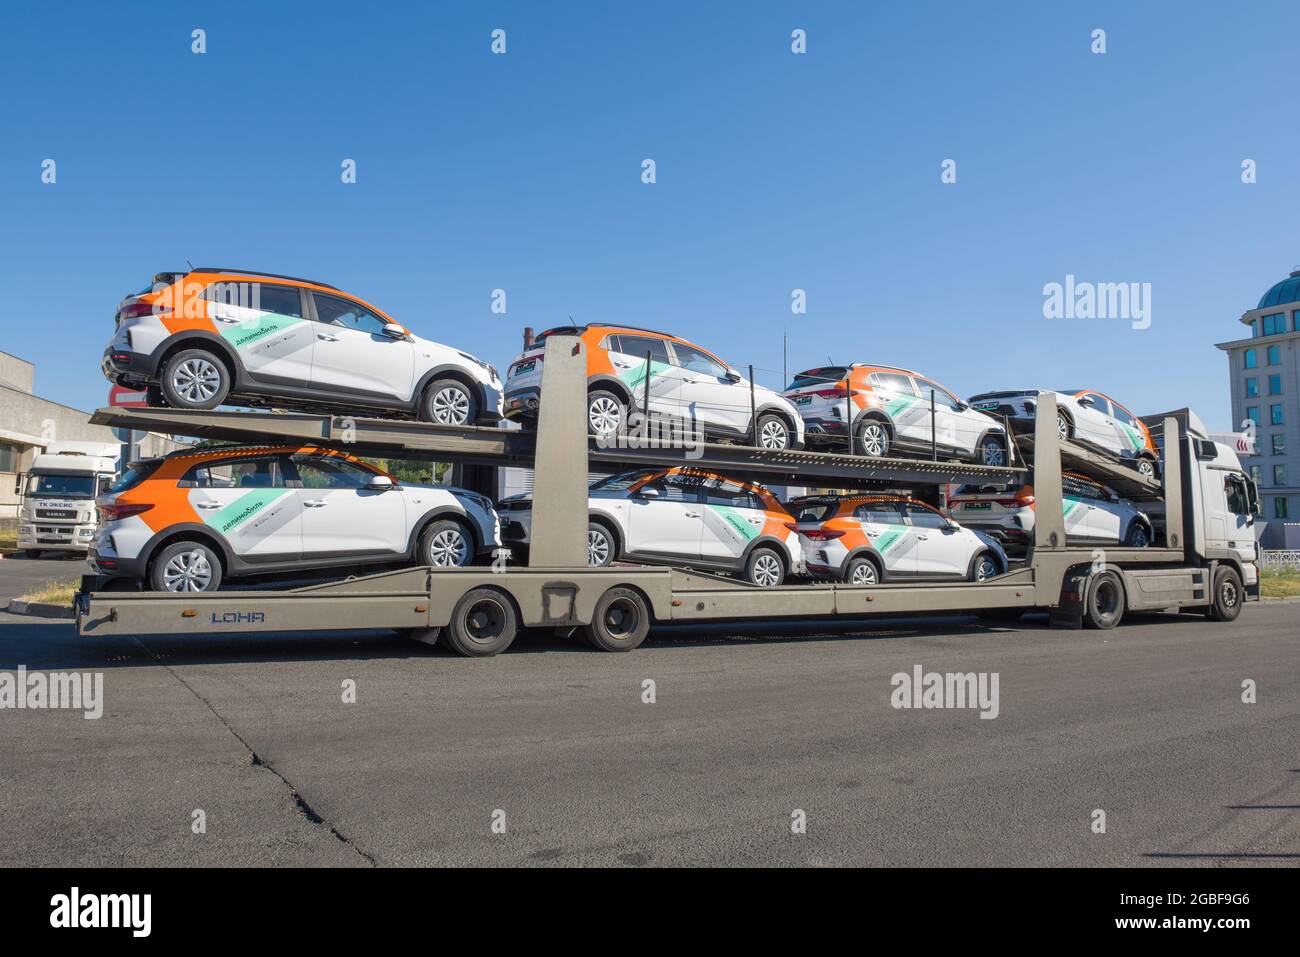 SAINT PETERSBURG, RUSSIA - JULY 17, 2021: Car carrier loaded with new cars of the Delimobil car sharing company on a sunny summer day Stock Photo